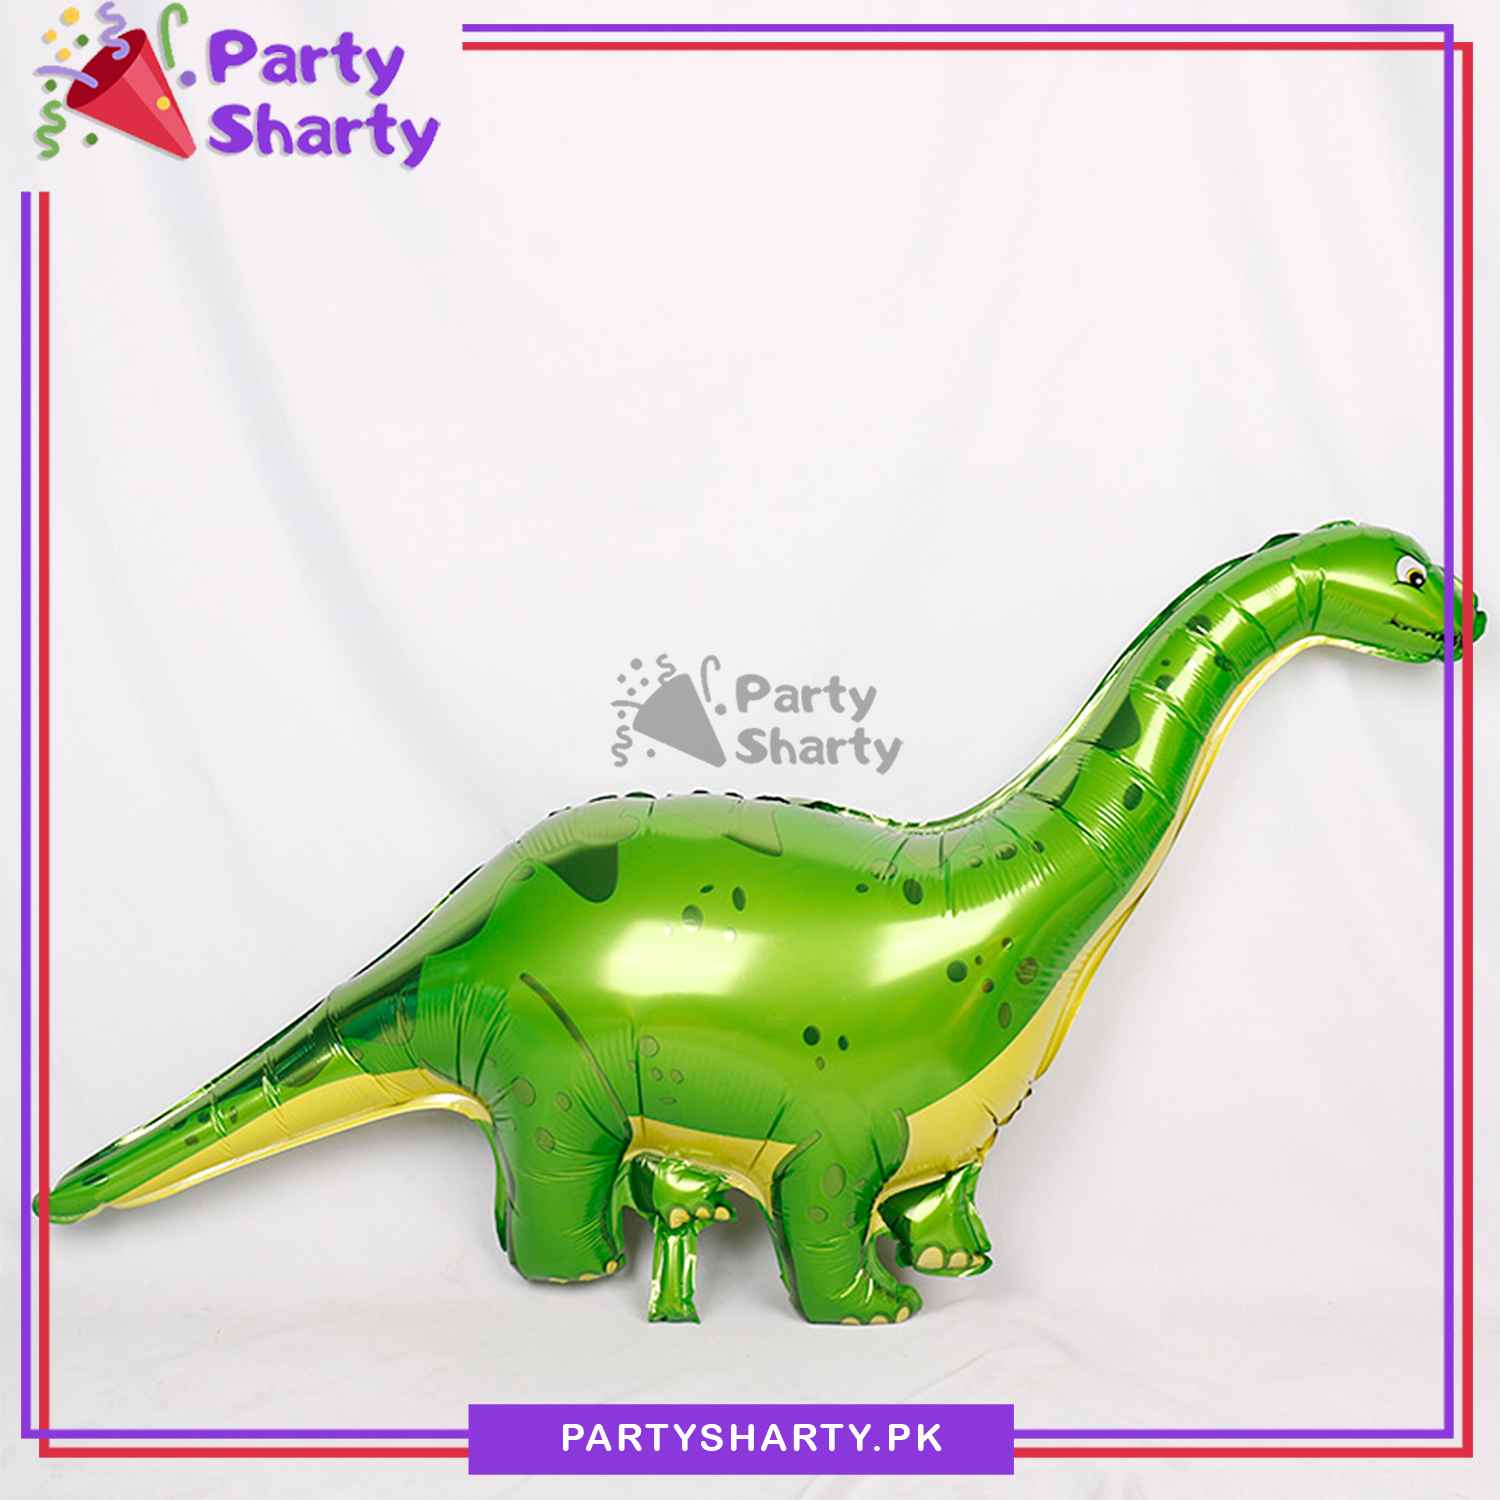 Large Long-necked Green Dragon Shaped Foil Balloon for Dinosaur / Dragon Theme Party Decoration